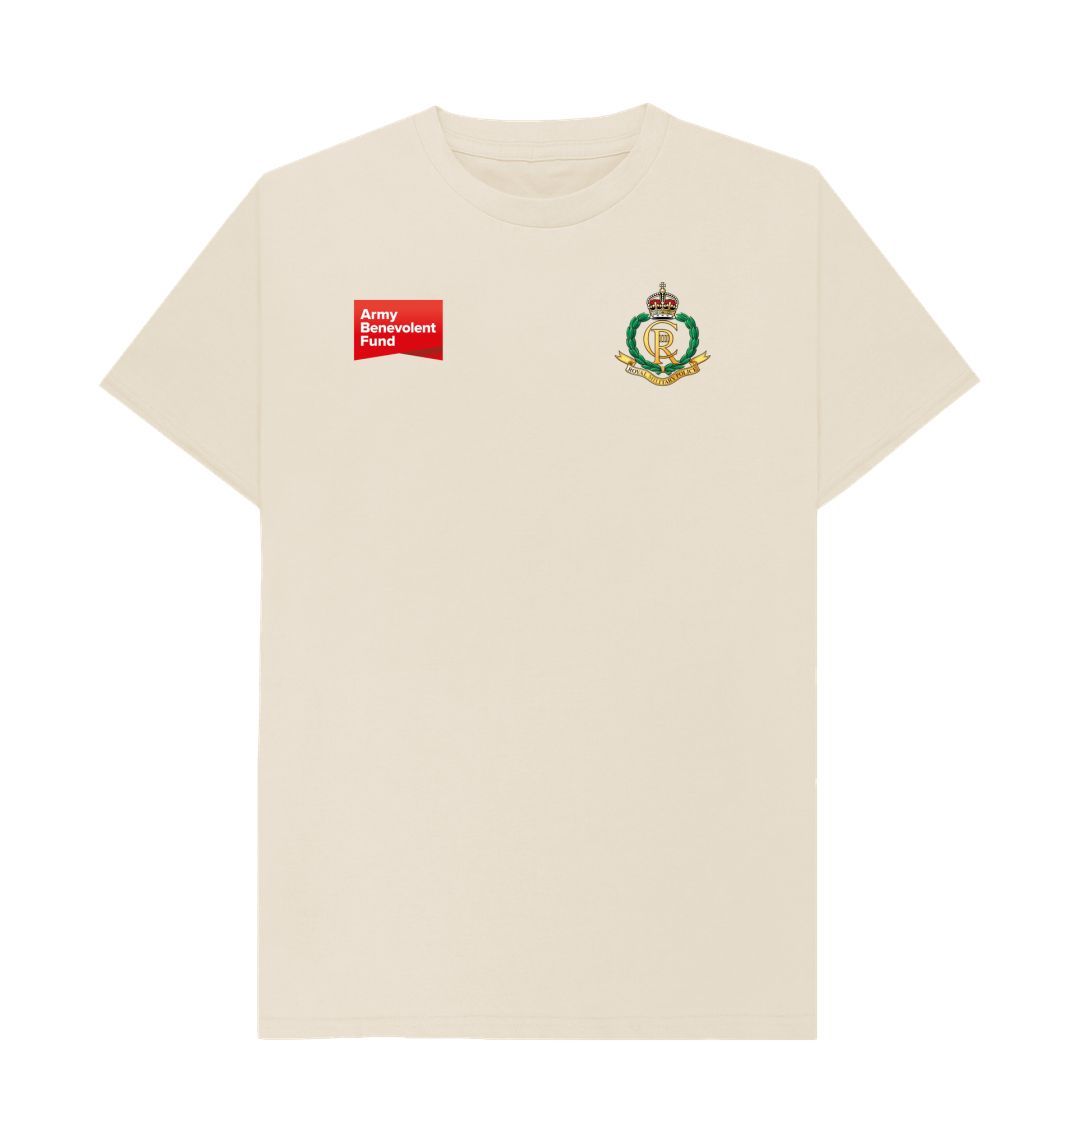 Adjutant General's Corps of Royal Military Police Unisex T-shirt - Army Benevolent Fund